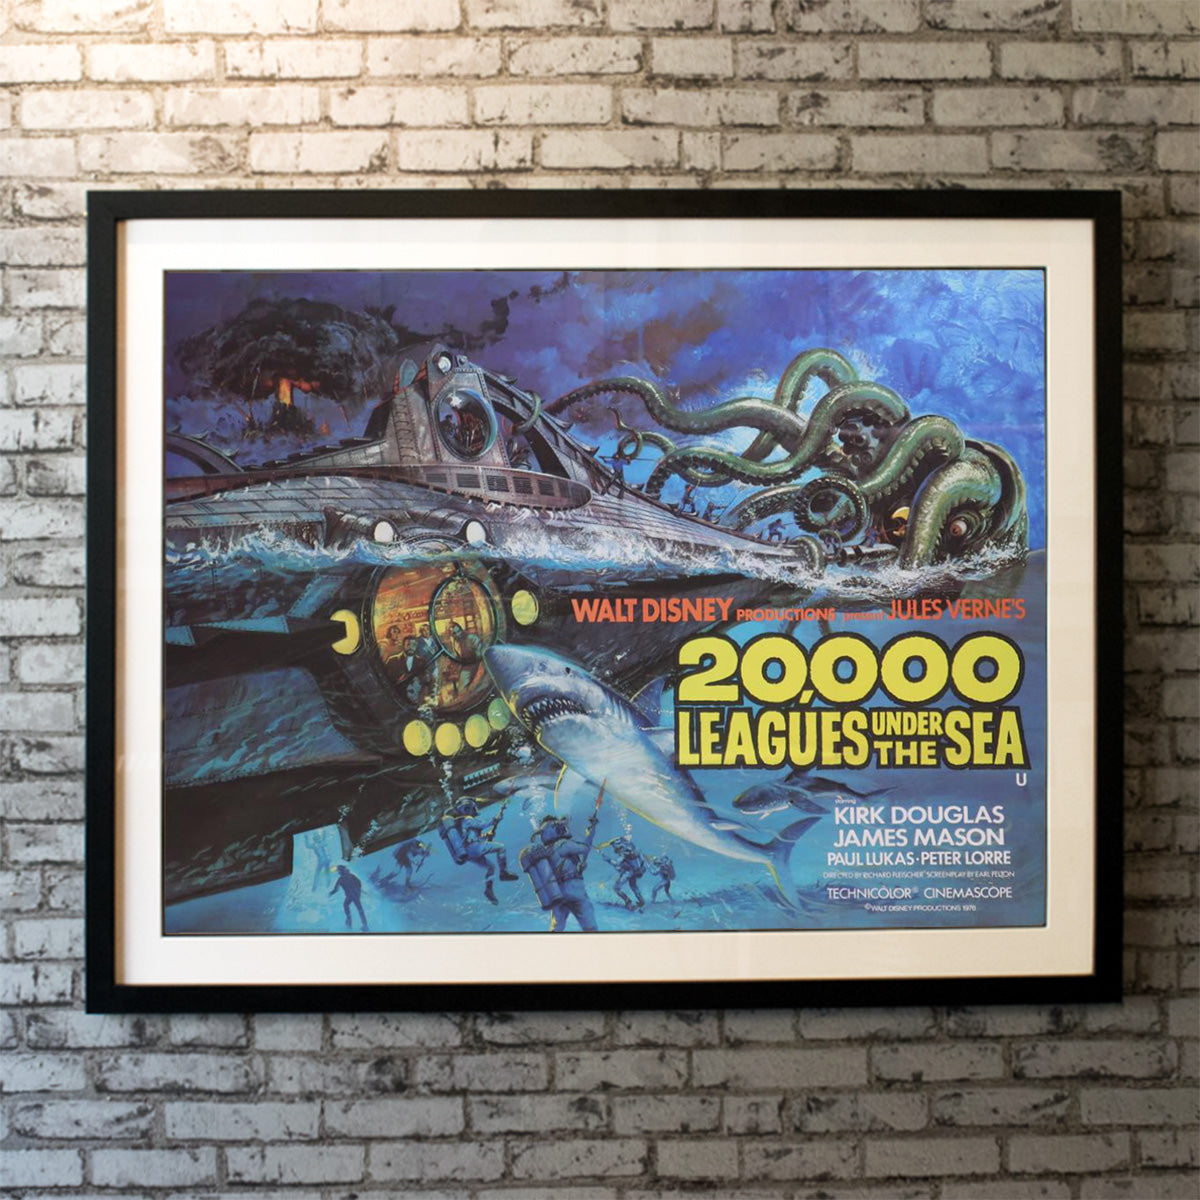 Original Movie Poster of 20,000 Leagues Under The Sea (1976R)